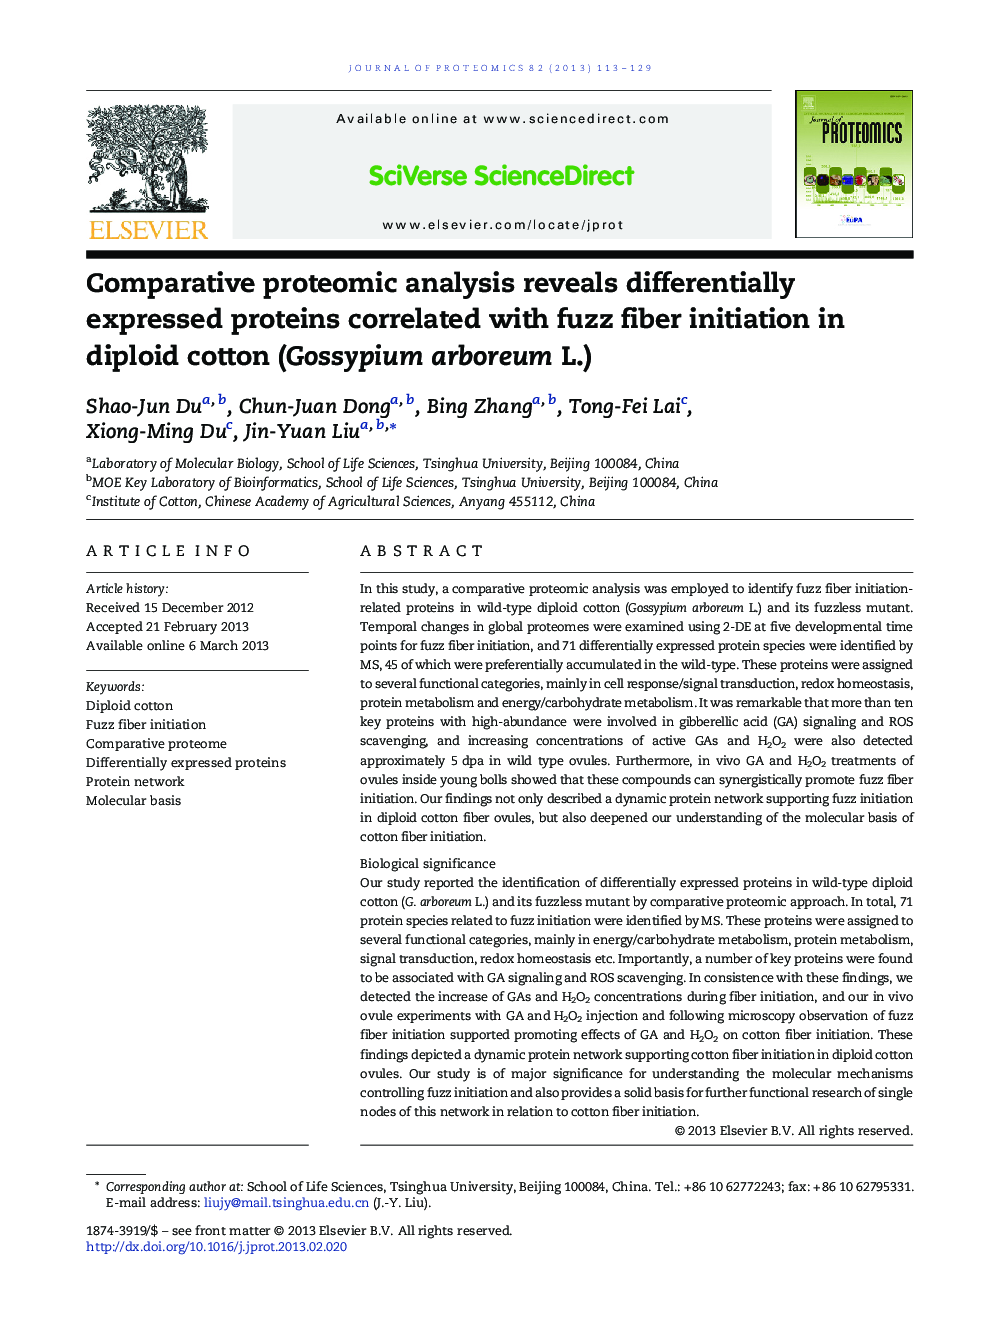 Comparative proteomic analysis reveals differentially expressed proteins correlated with fuzz fiber initiation in diploid cotton (Gossypium arboreum L.)